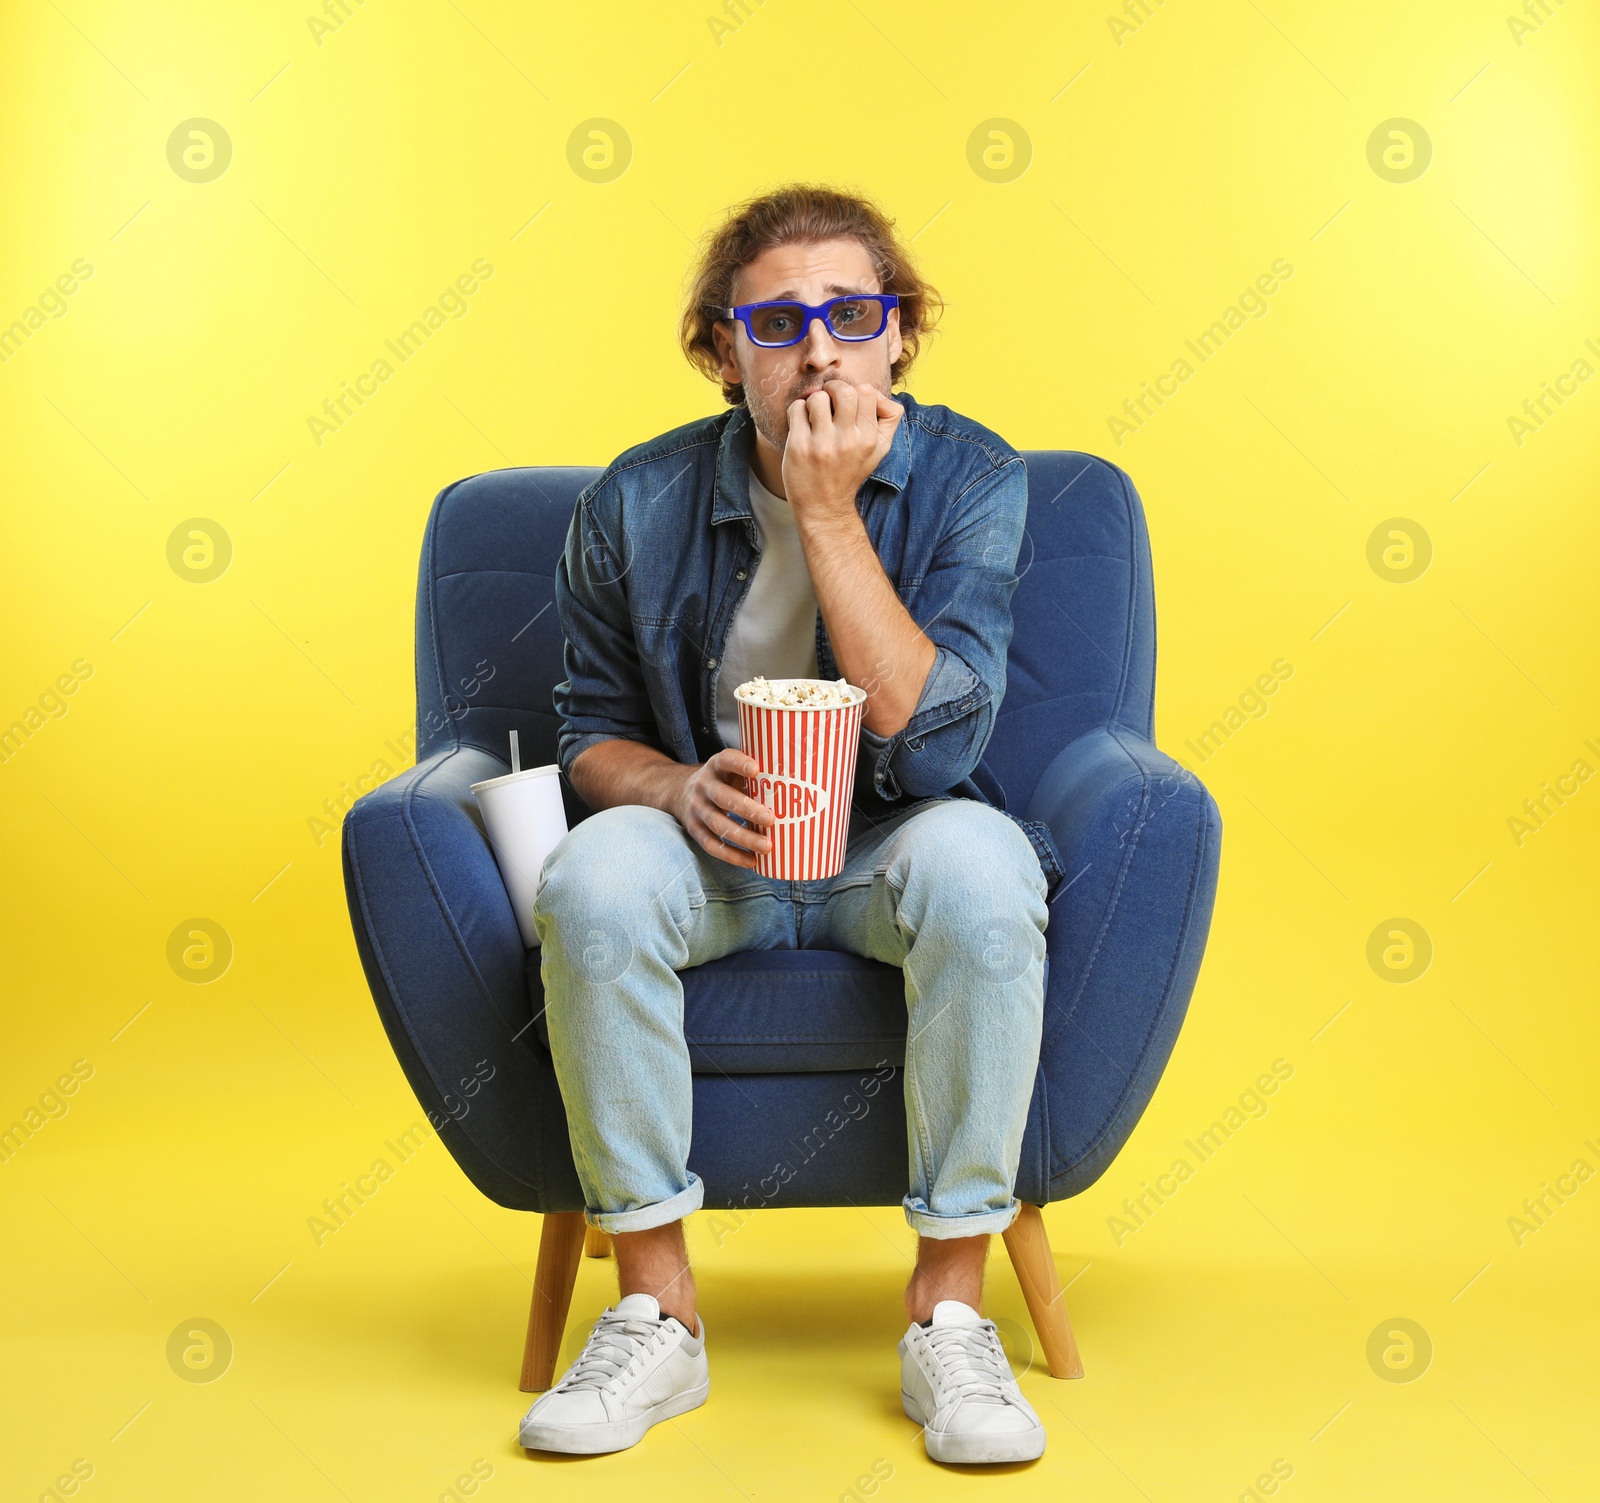 Photo of Emotional man with 3D glasses, popcorn and beverage sitting in armchair during cinema show on color background